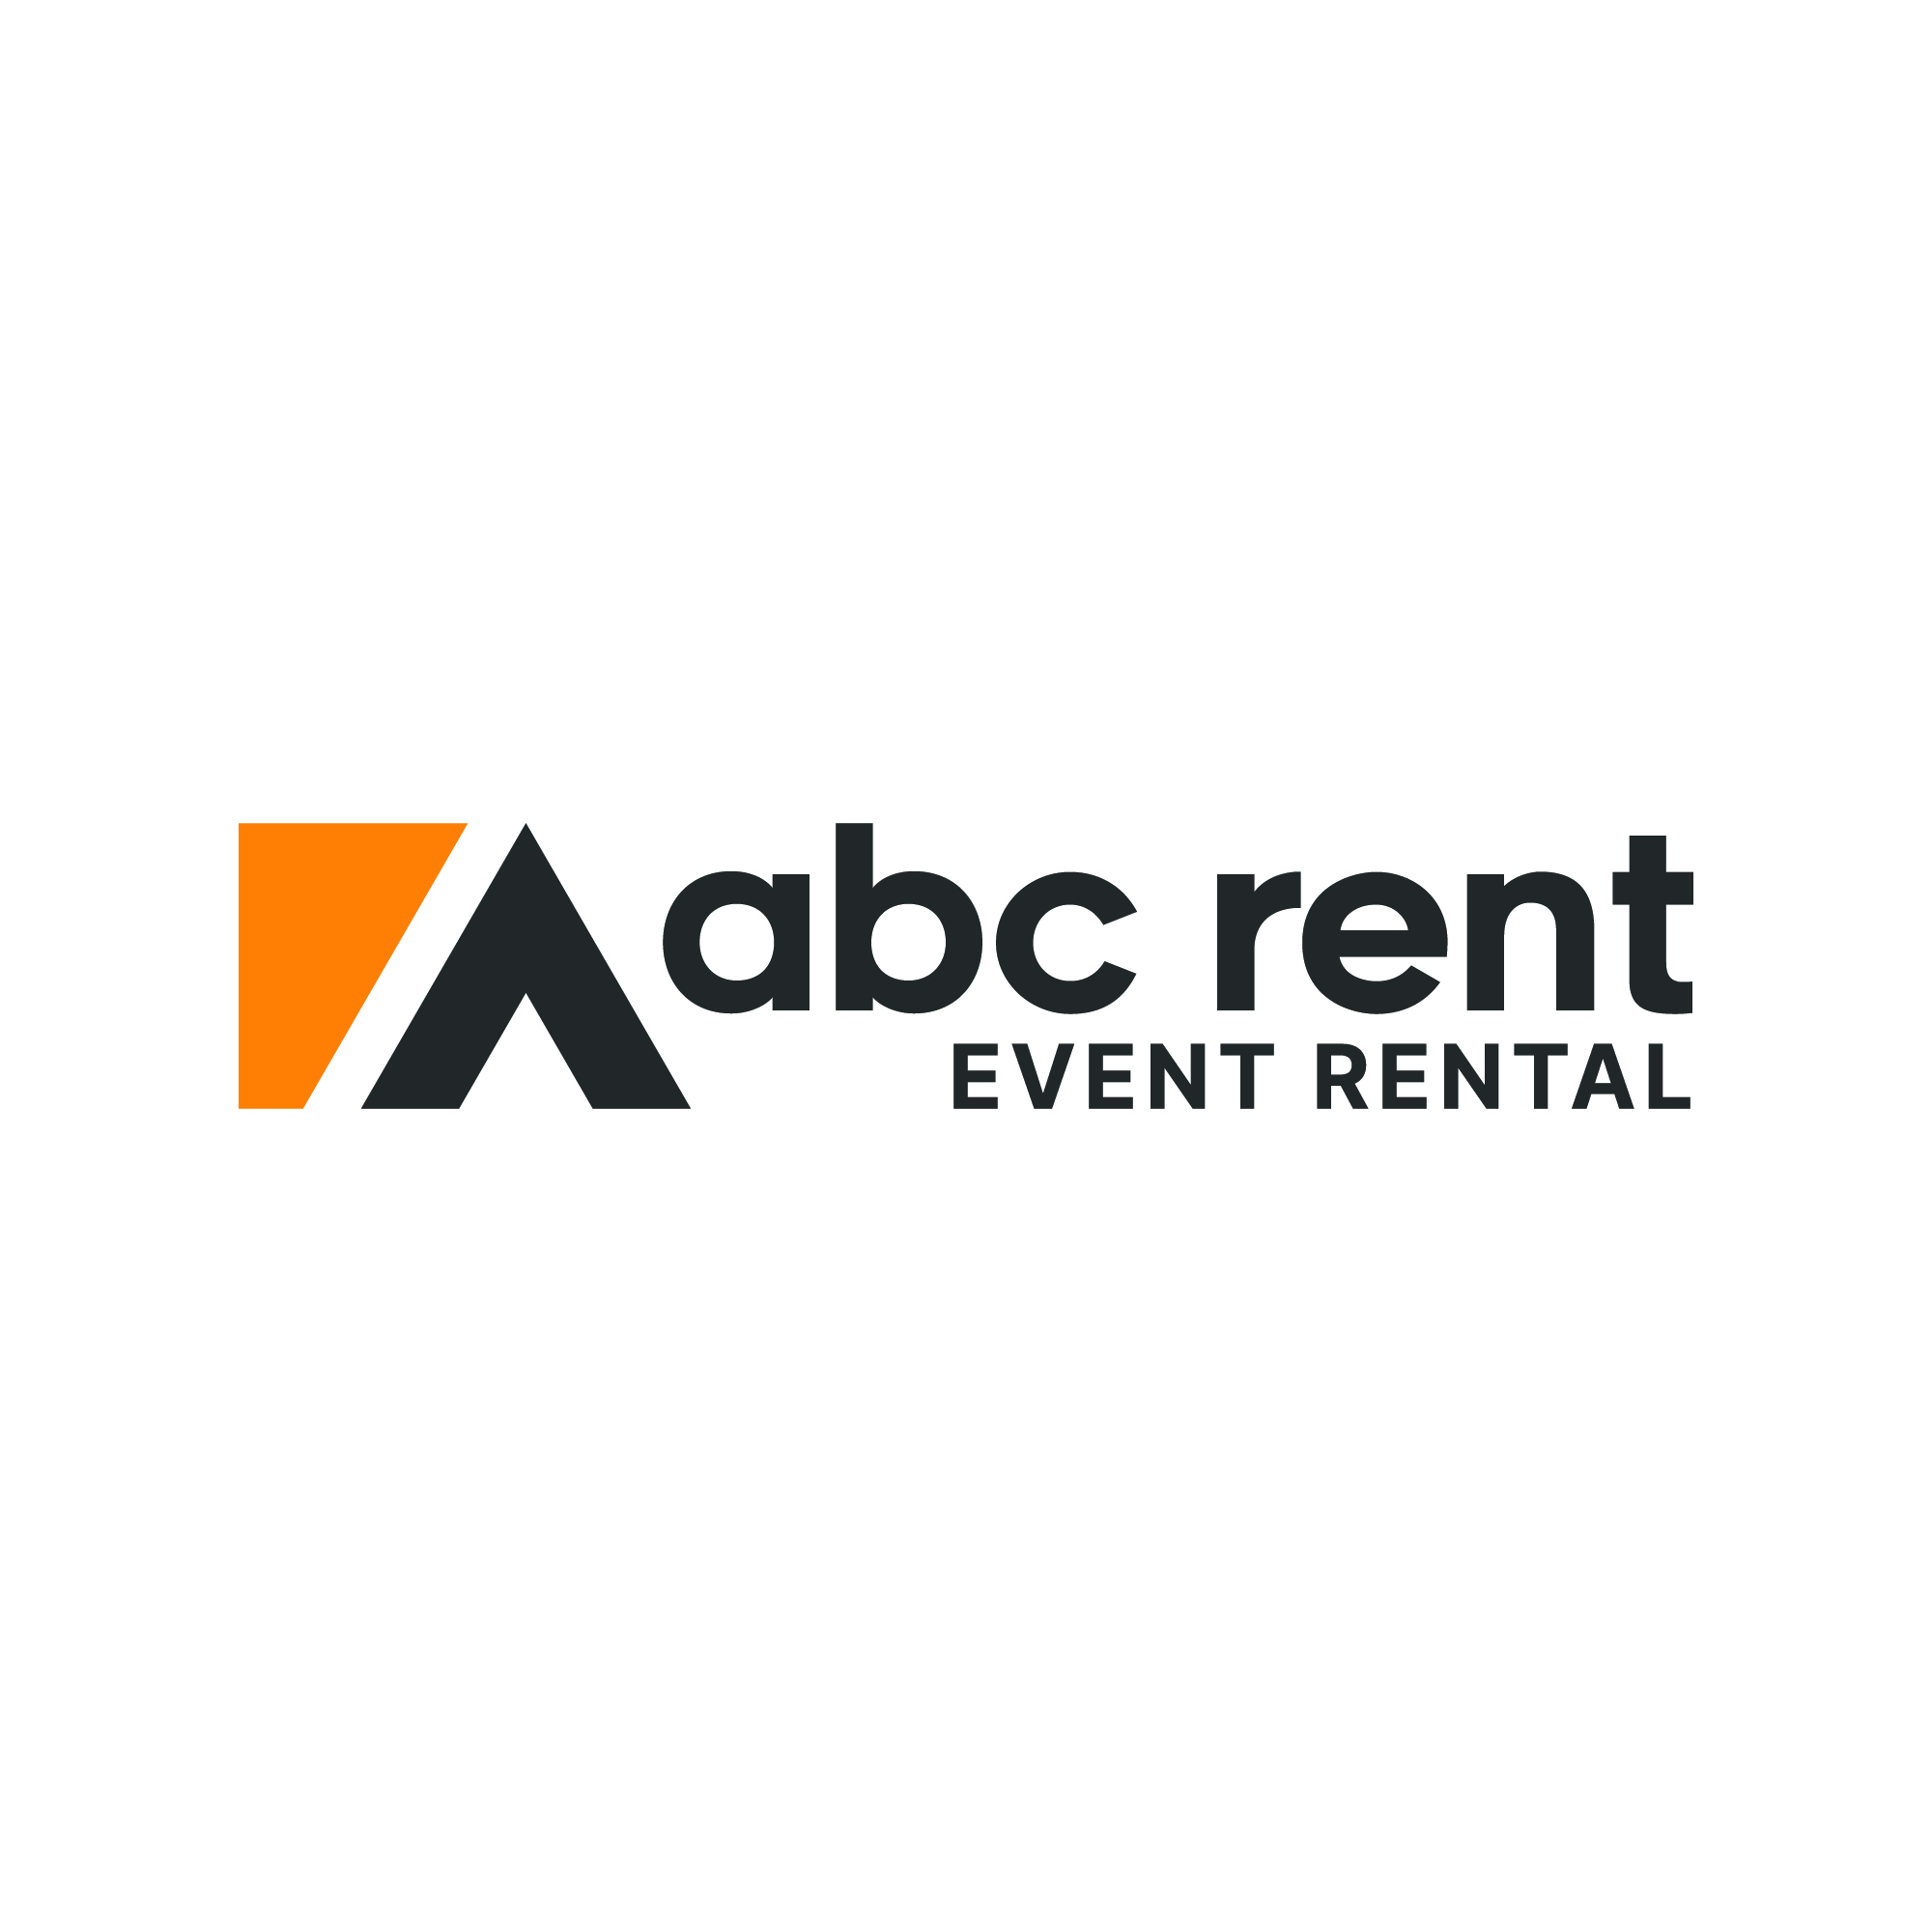 https://sconcept.be/wp-content/uploads/2022/09/abcrent-icon-full-color-dark-copy-2.jpg